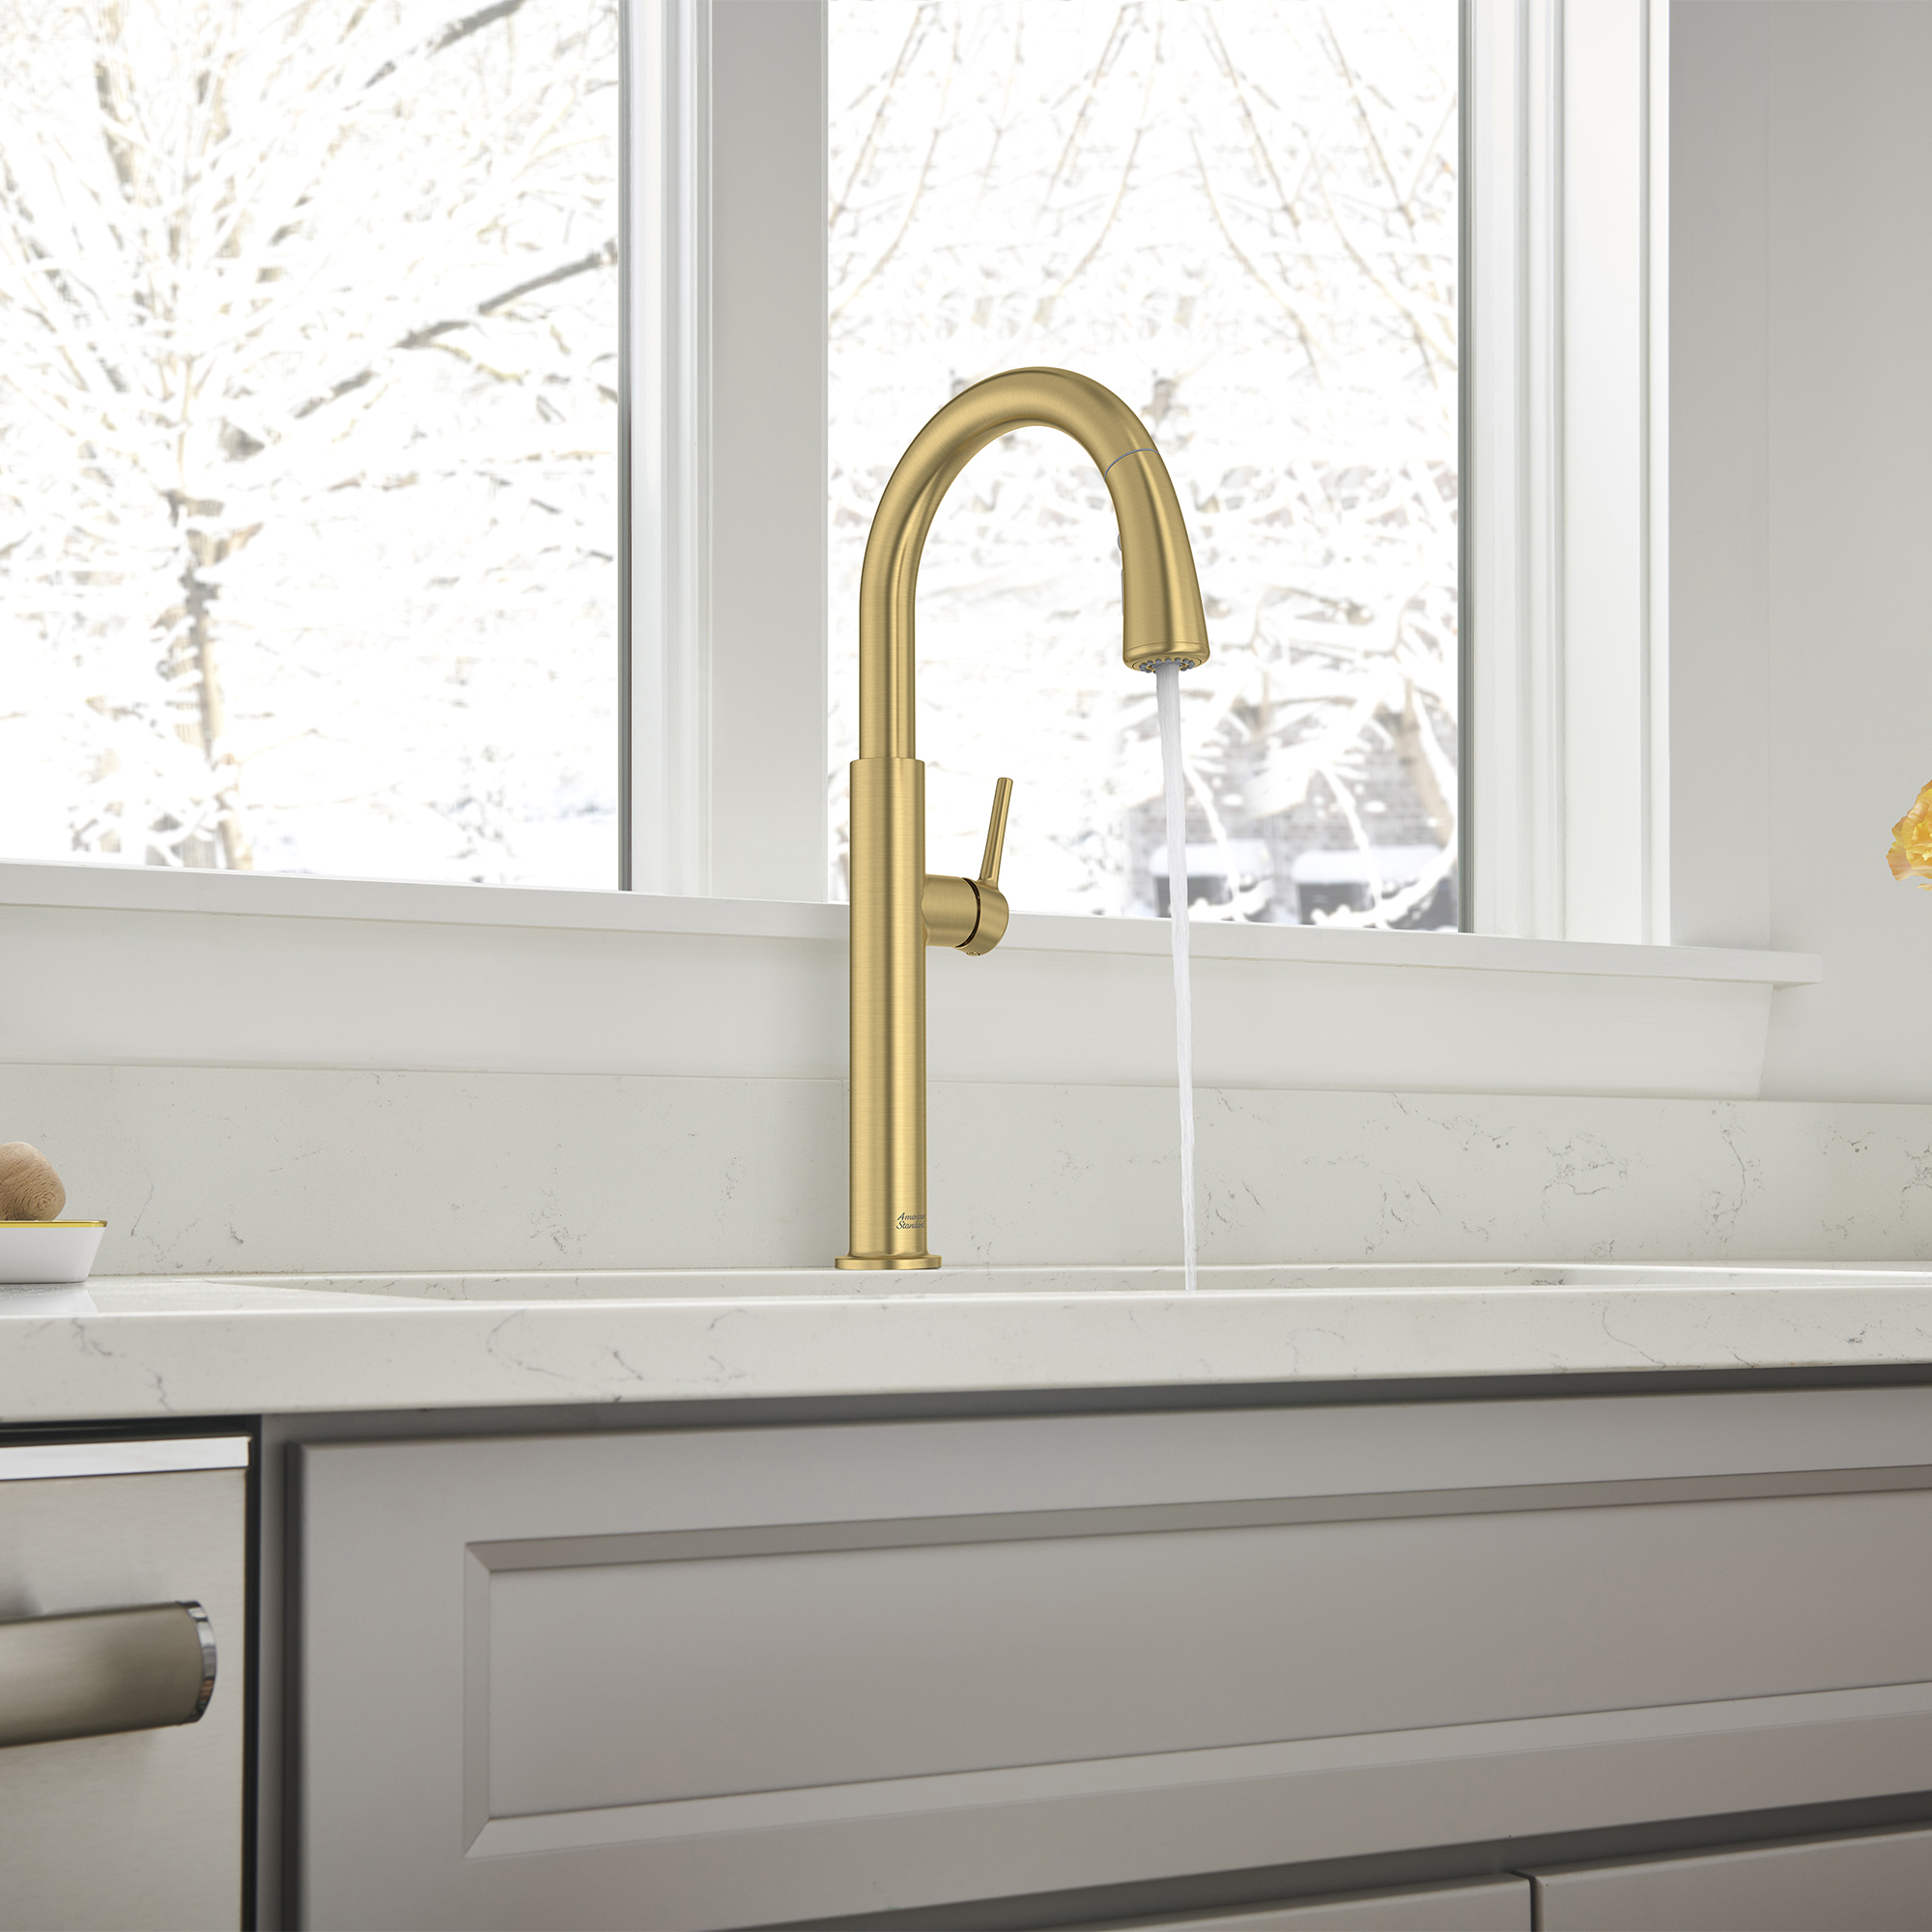 Studio® S Pull-Down Dual Spray Kitchen Faucet